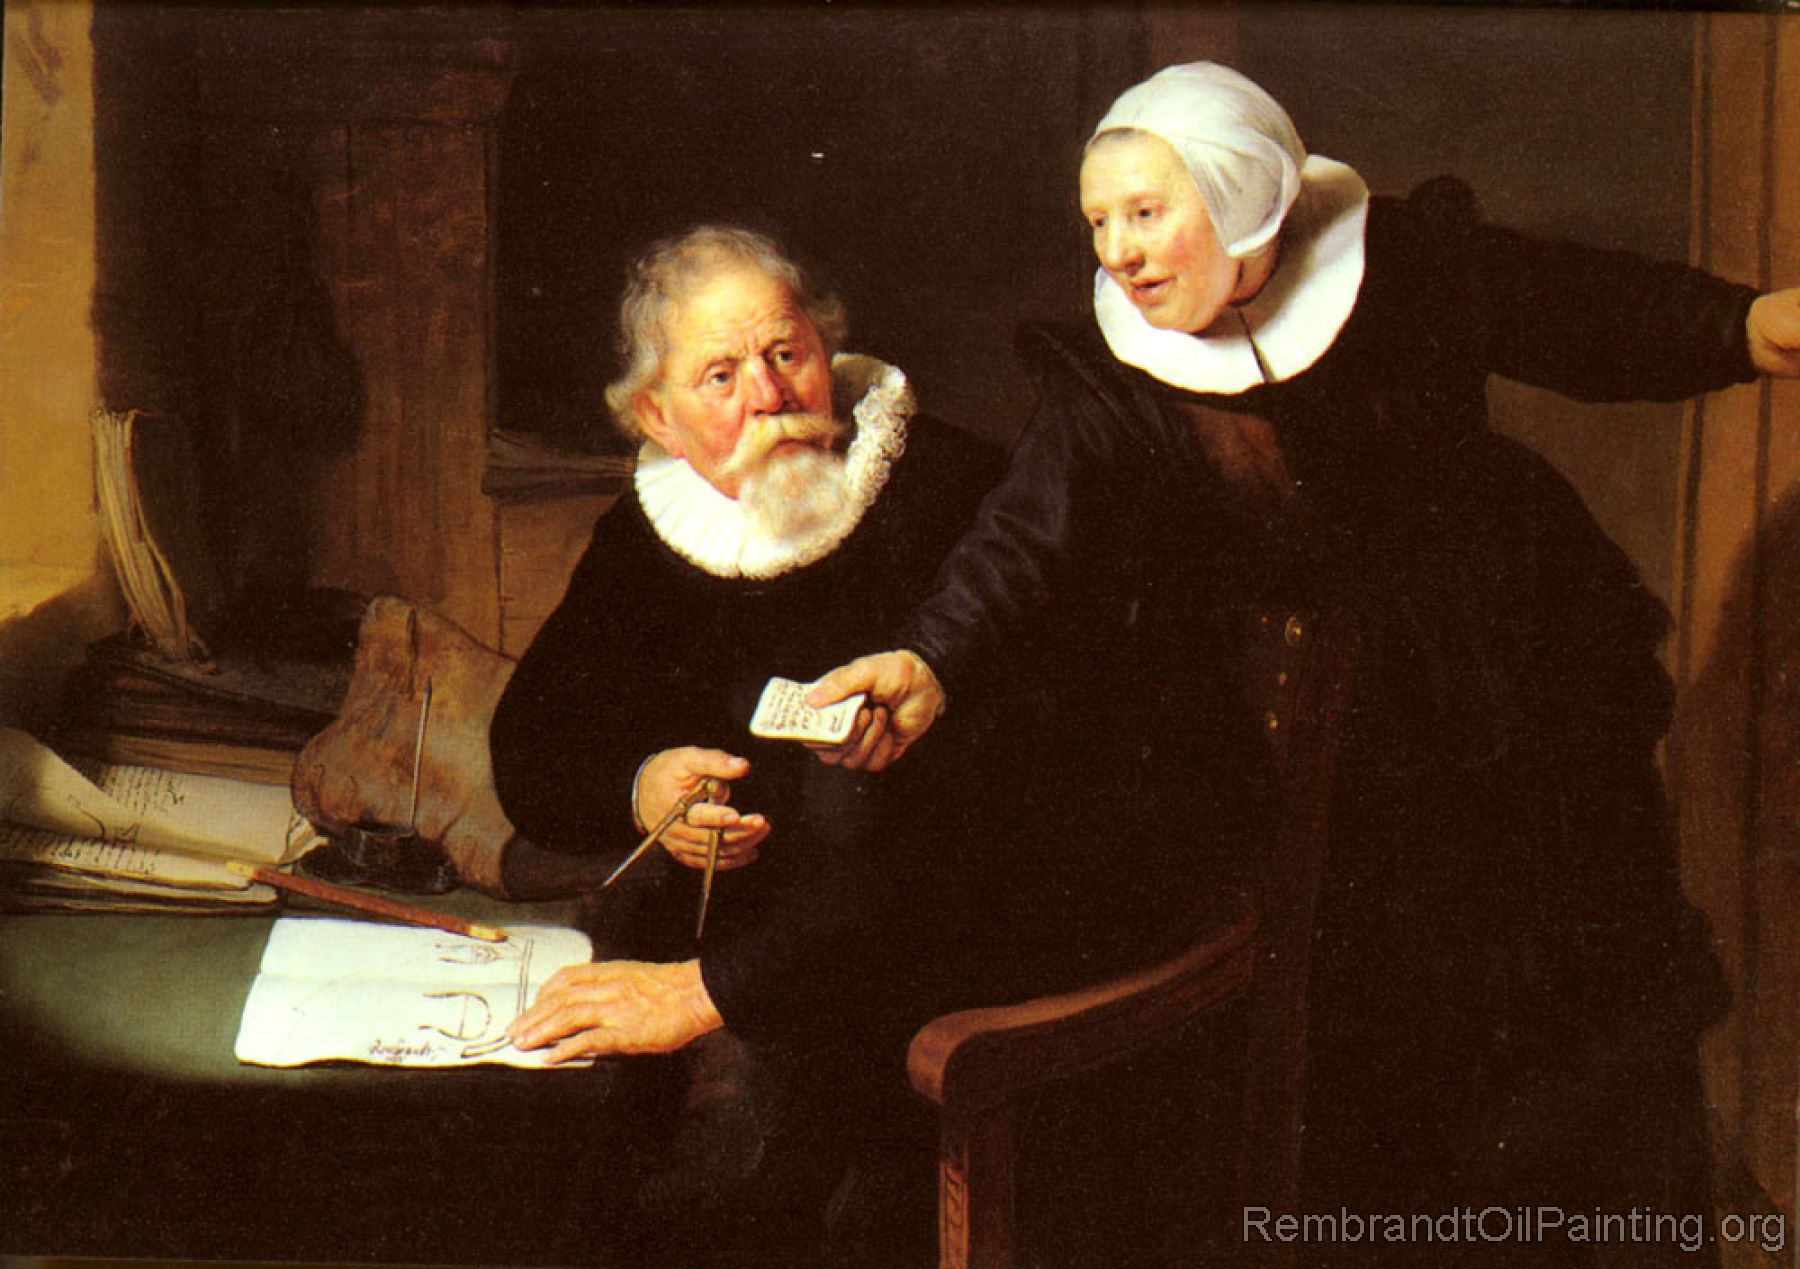 The Shipbuilder and his Wife